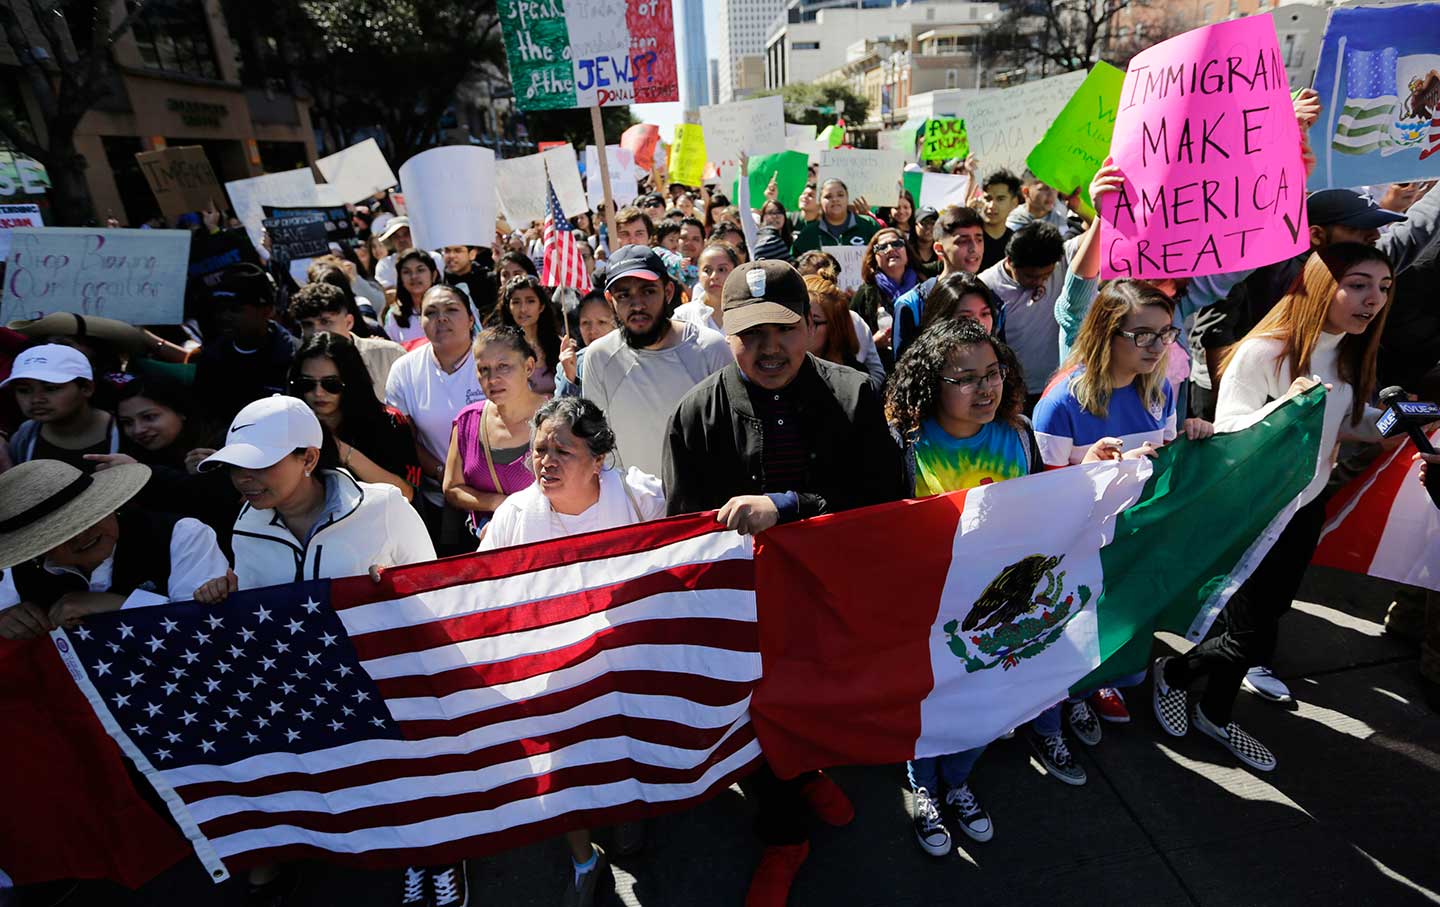 A group marches through downtown Austin heading to the Texas Capitol during an immigration protest, Thursday, Feb. 16, 2017.